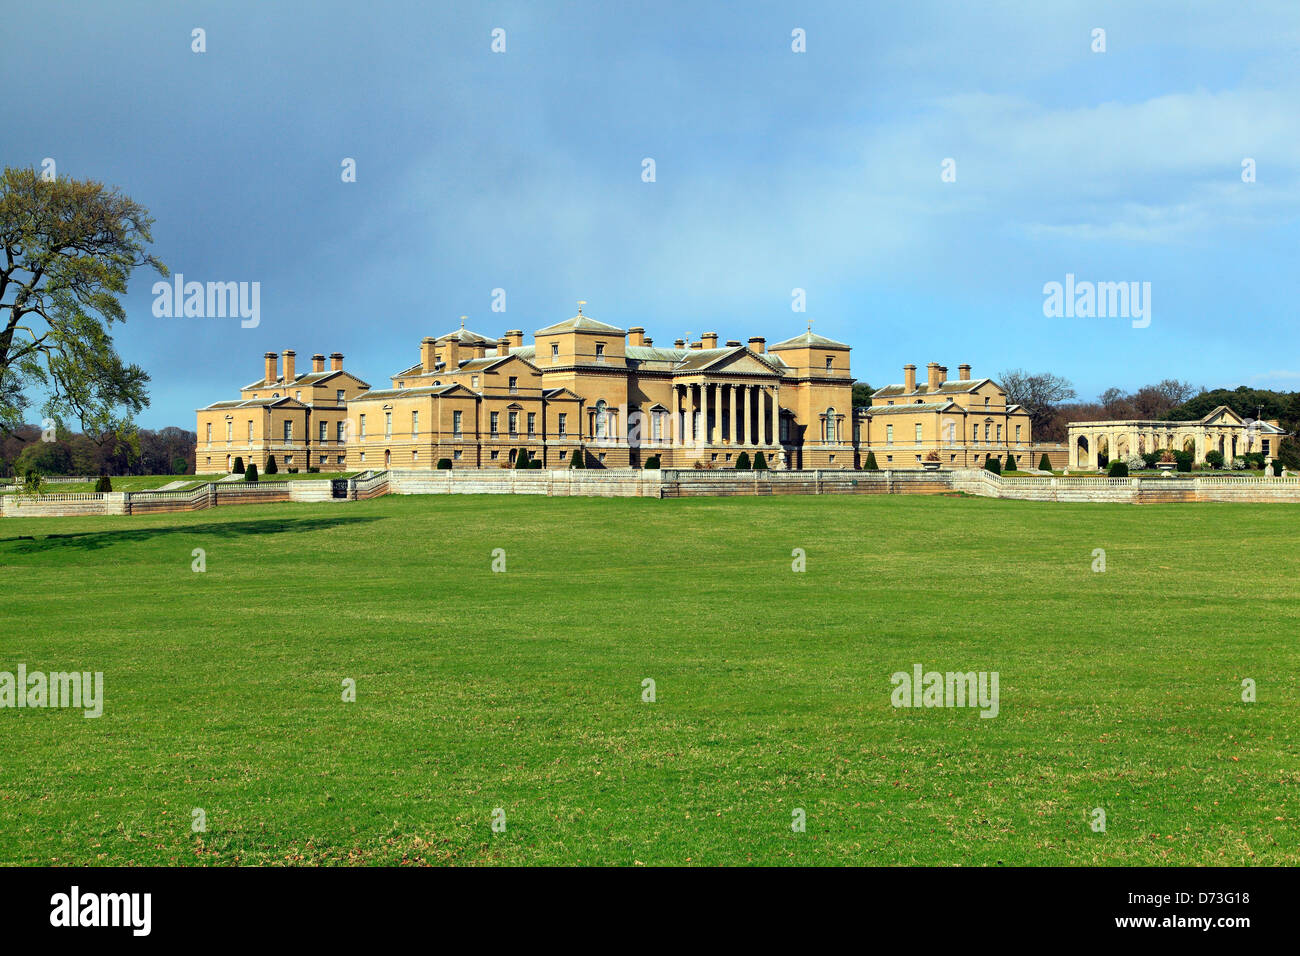 Holkham Hall, Norfolk, viewed across Park, 18th century Palladian mansion, England, UK English stately home homes Stock Photo